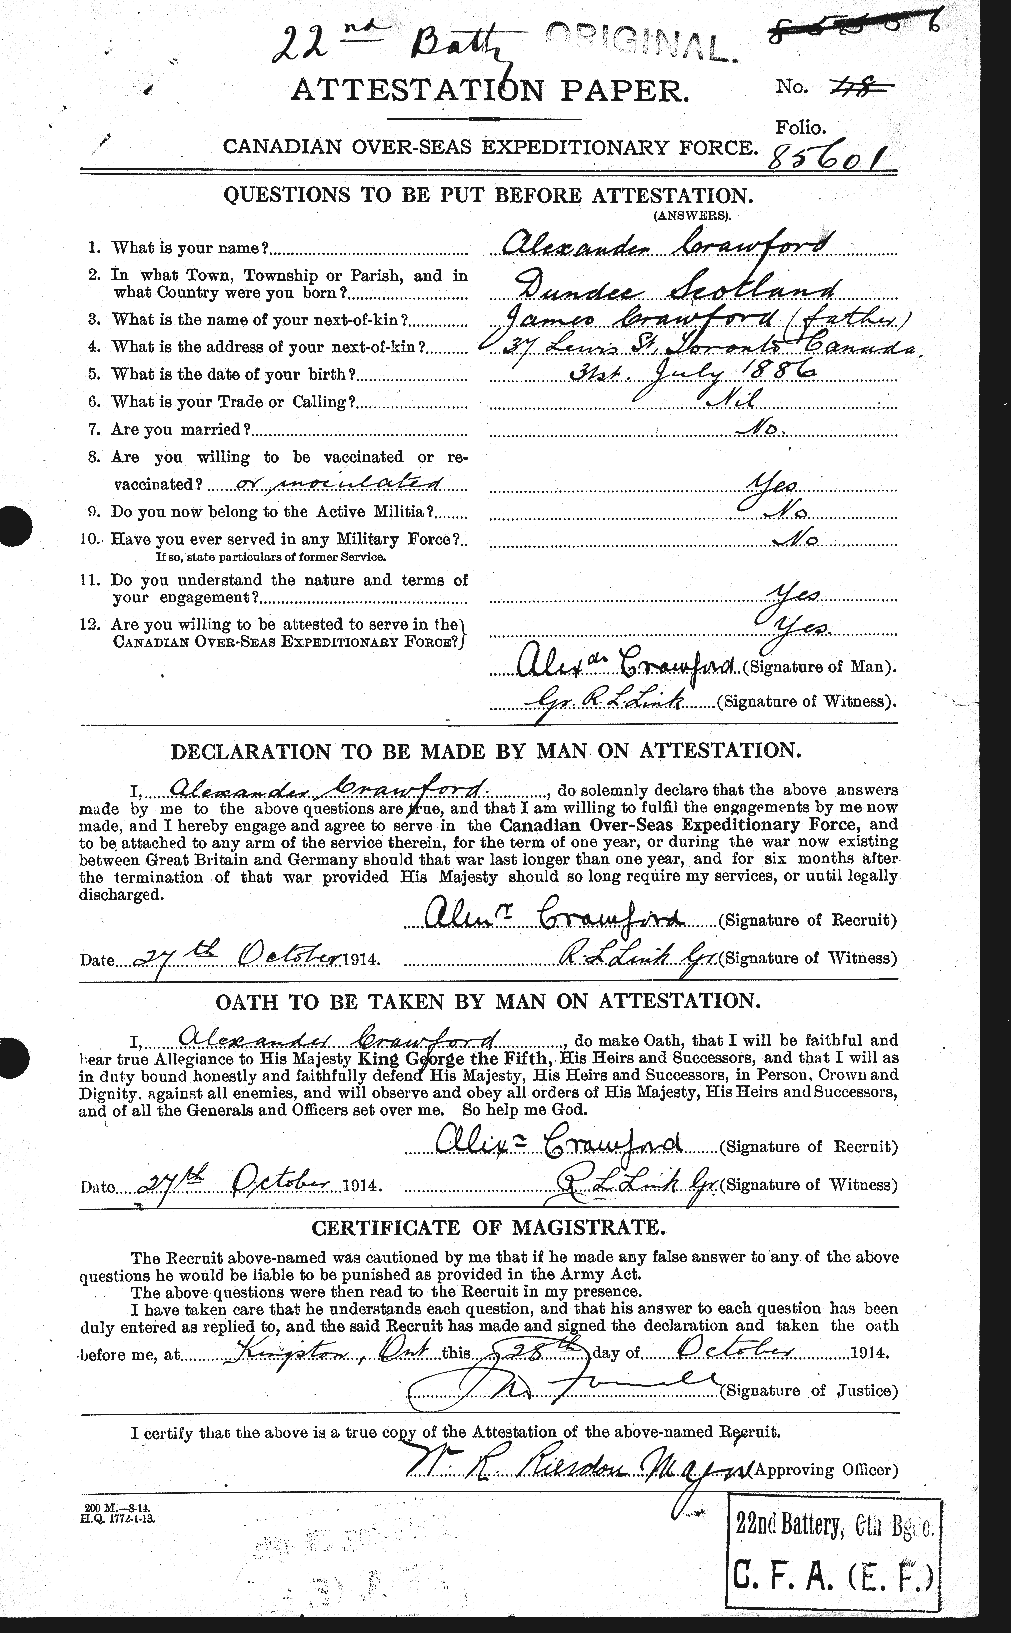 Personnel Records of the First World War - CEF 060962a